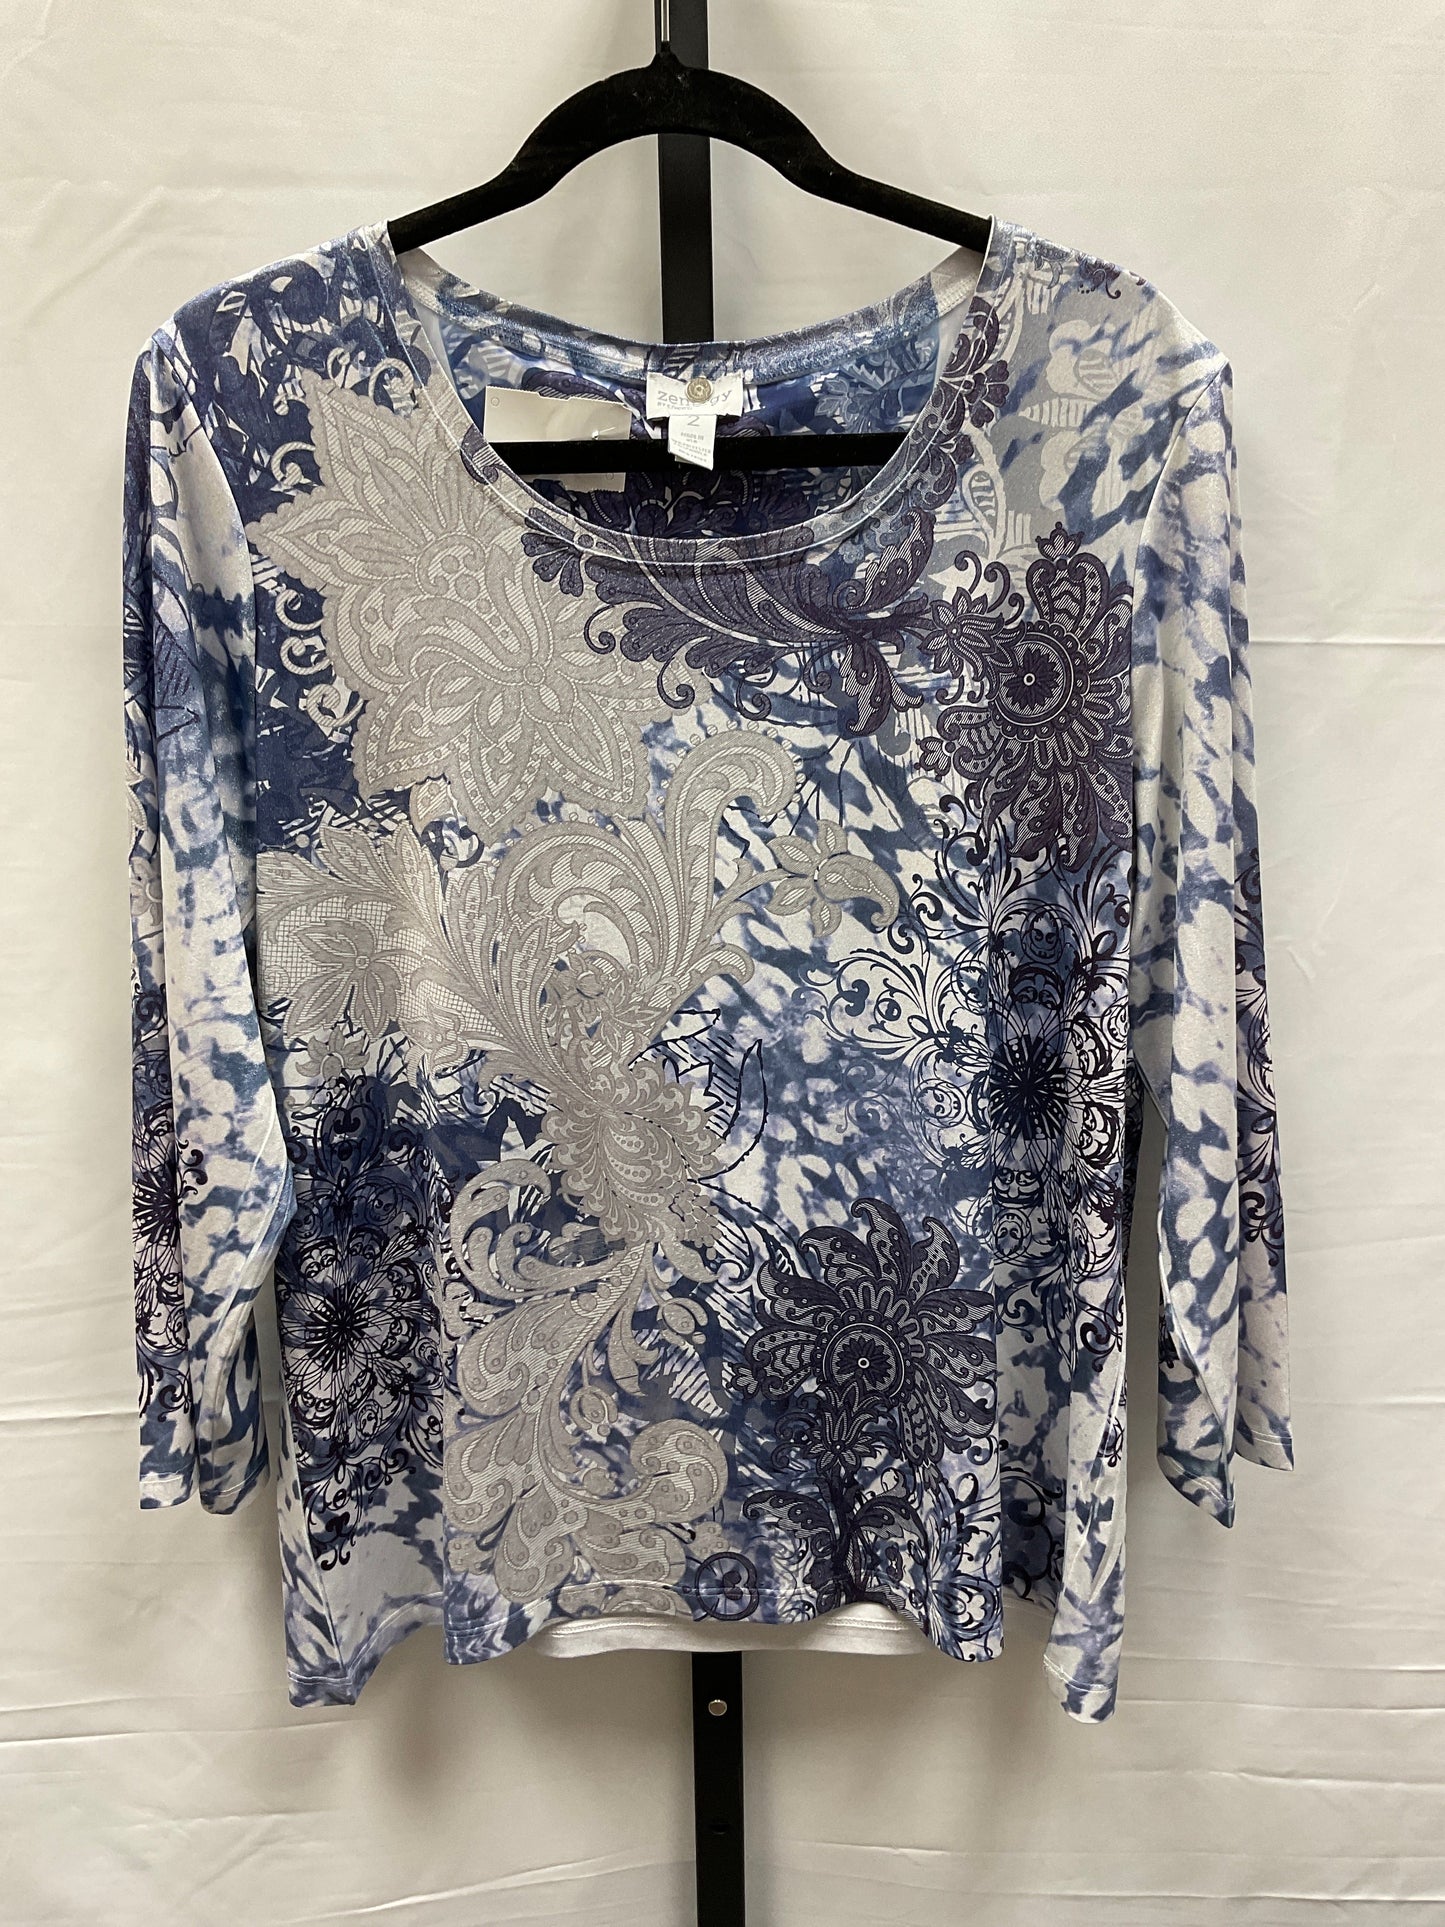 Blue & Silver Top 3/4 Sleeve Zenergy By Chicos, Size L